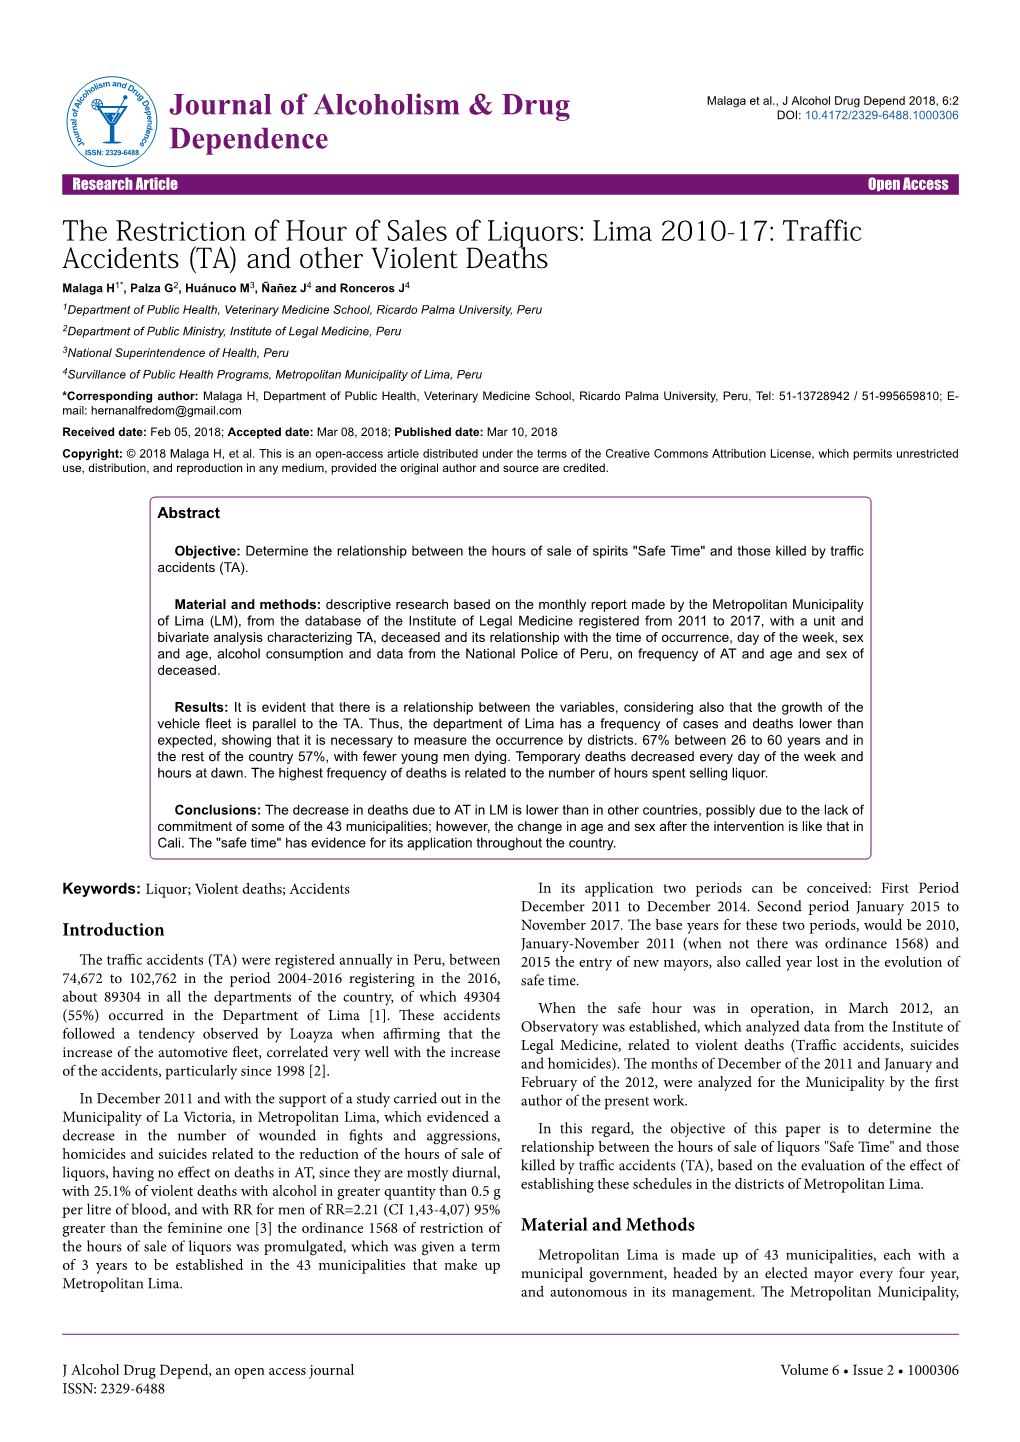 The Restriction of Hour of Sales of Liquors: Lima 2010-17: Traffic